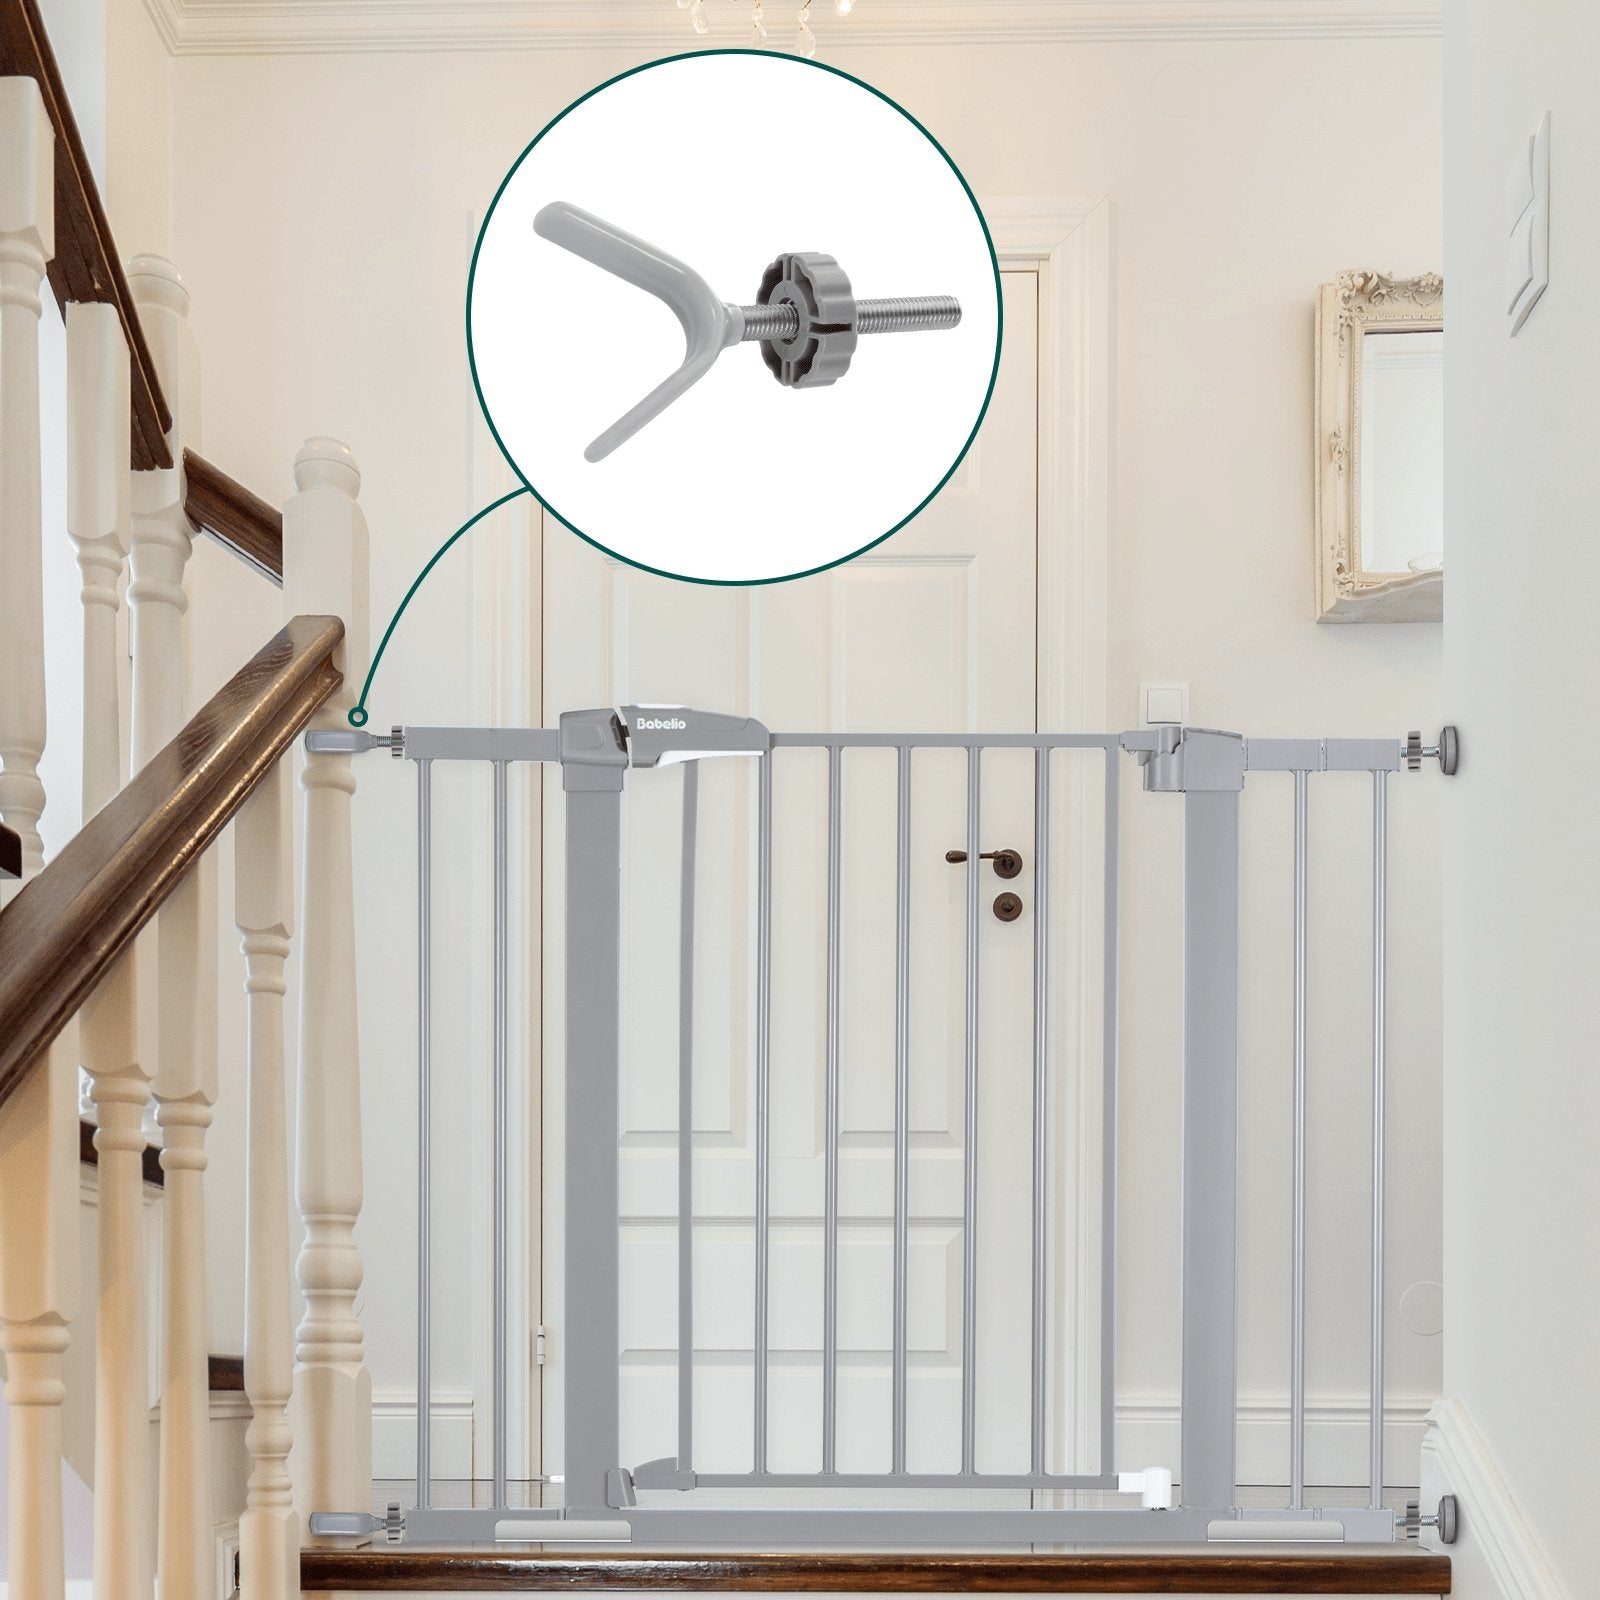 Babelio Baby Gate Stairs Banister Adapter-Y Threaded Spindle Rods (10 mm) - babeliobaby